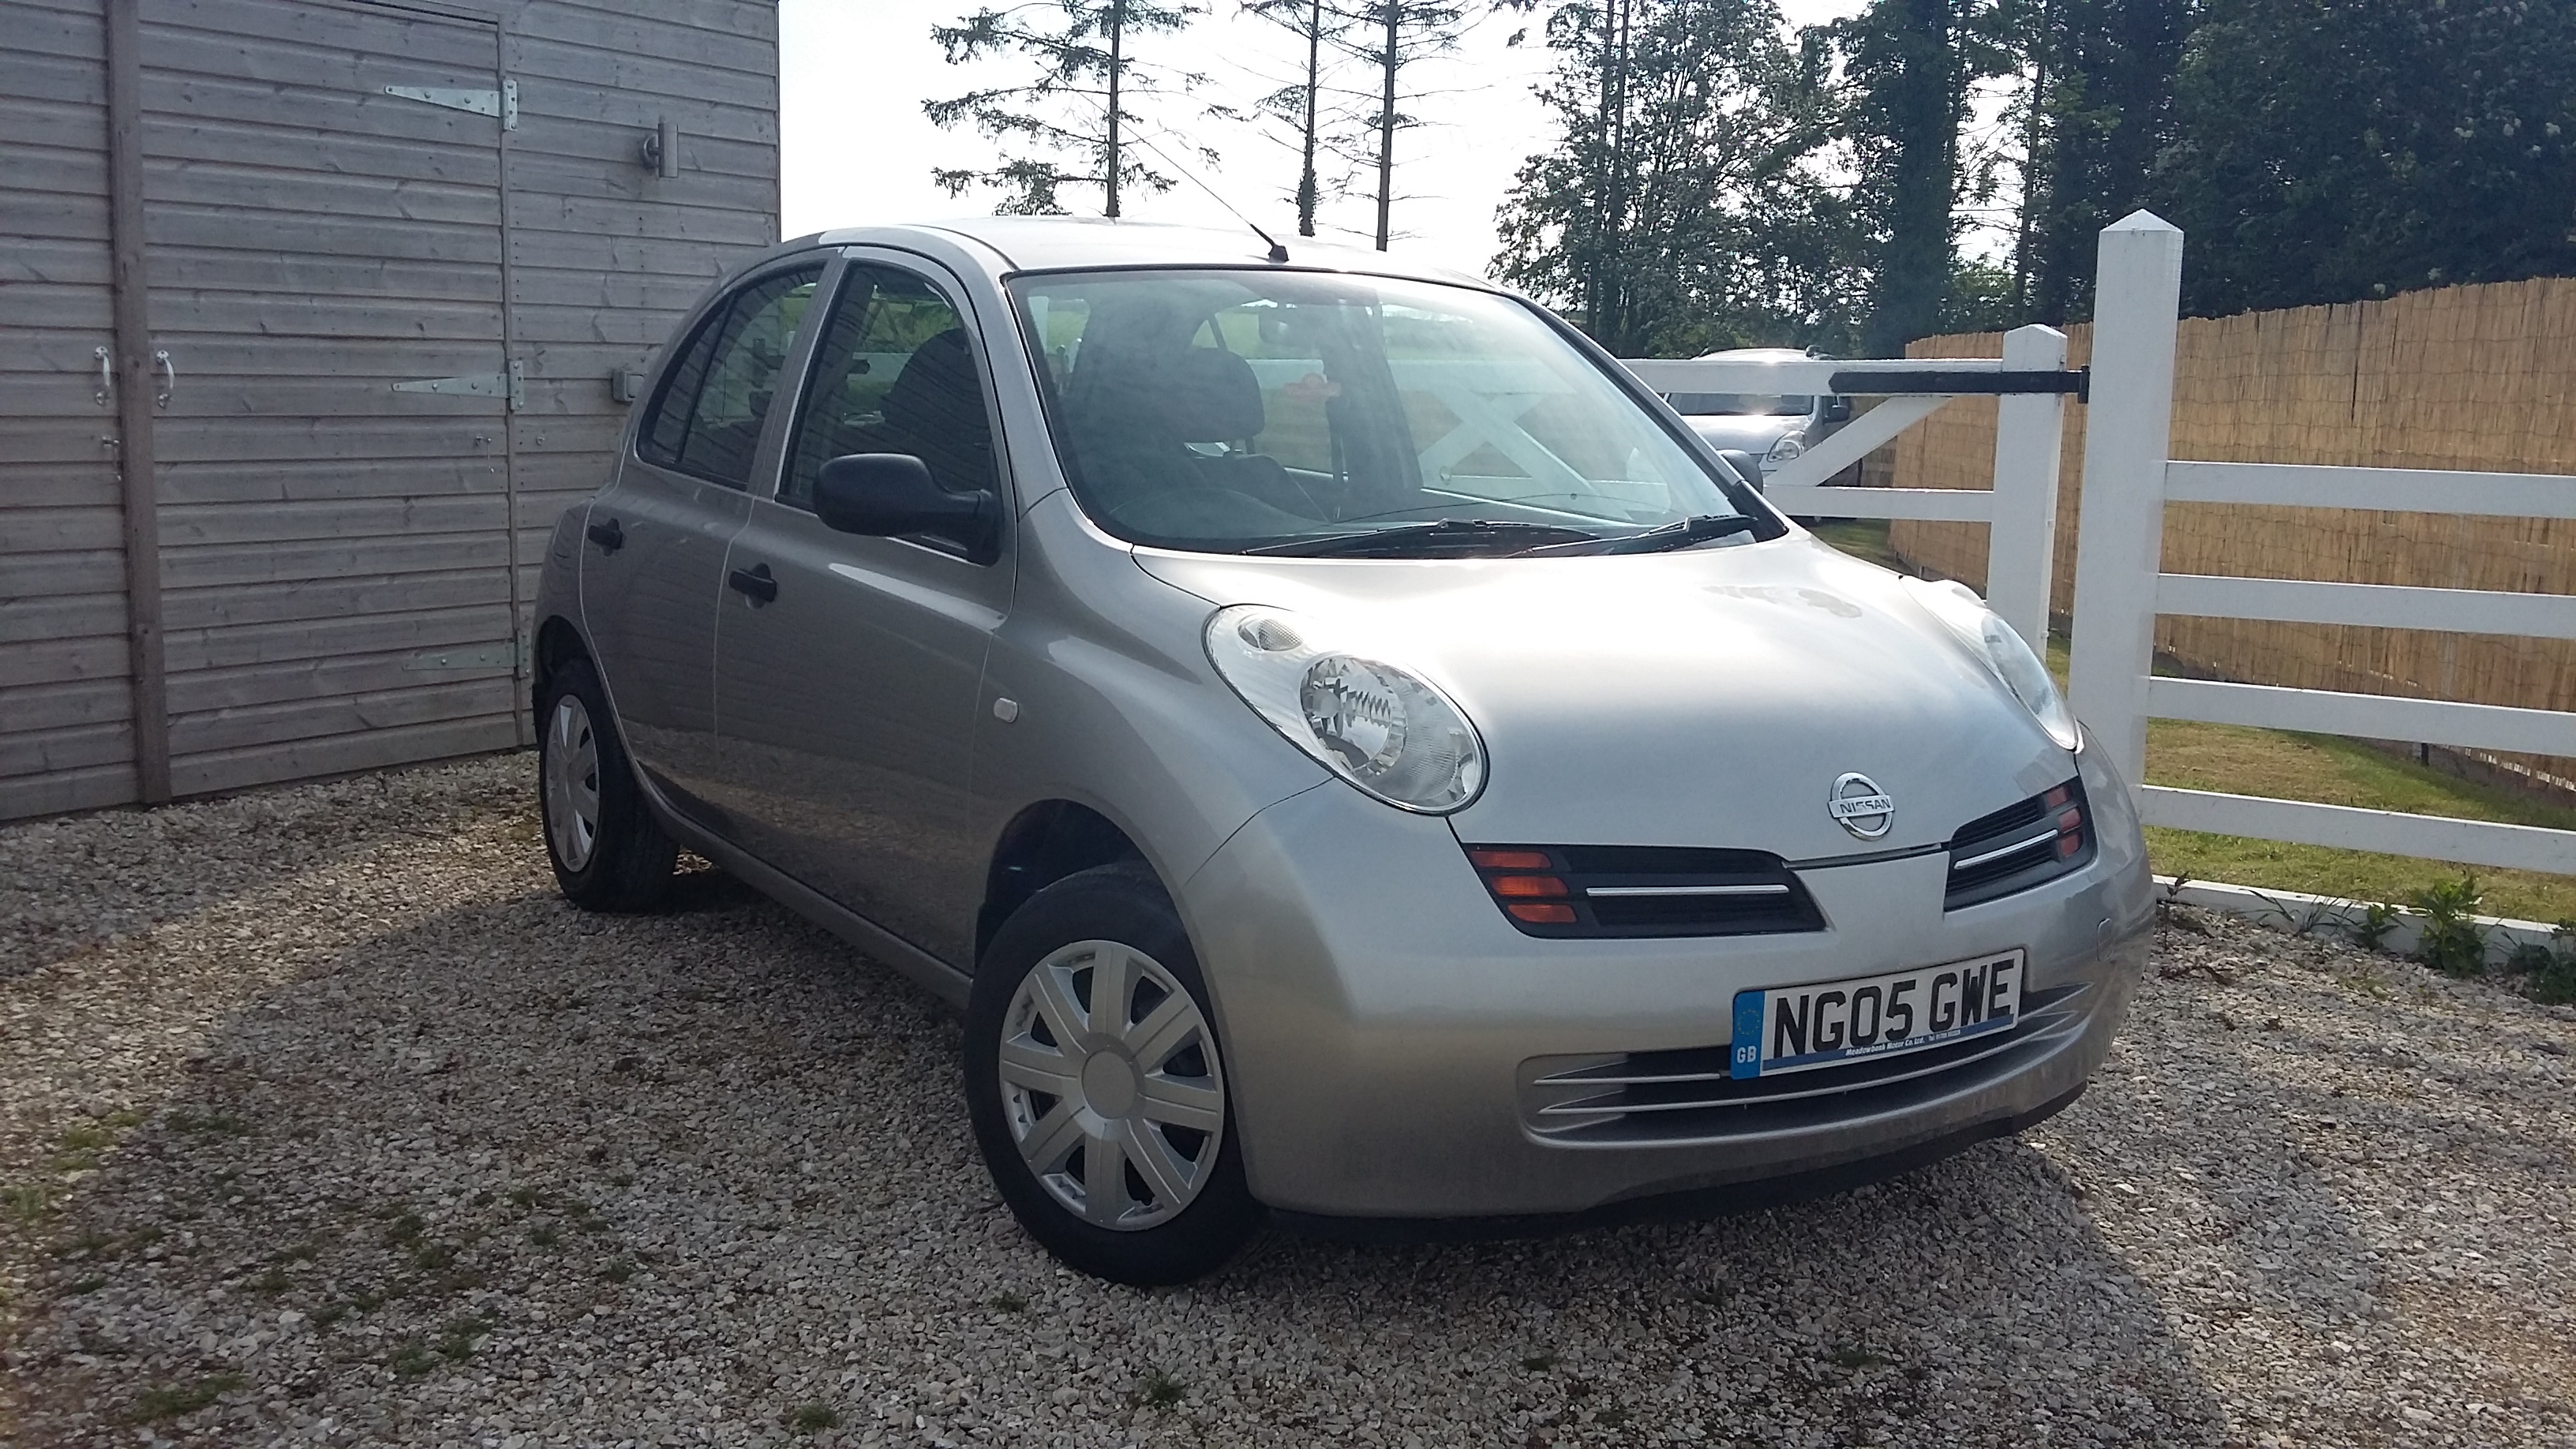 2005 Nissan Micra 5 Door for sale by Woodlands Cars (15